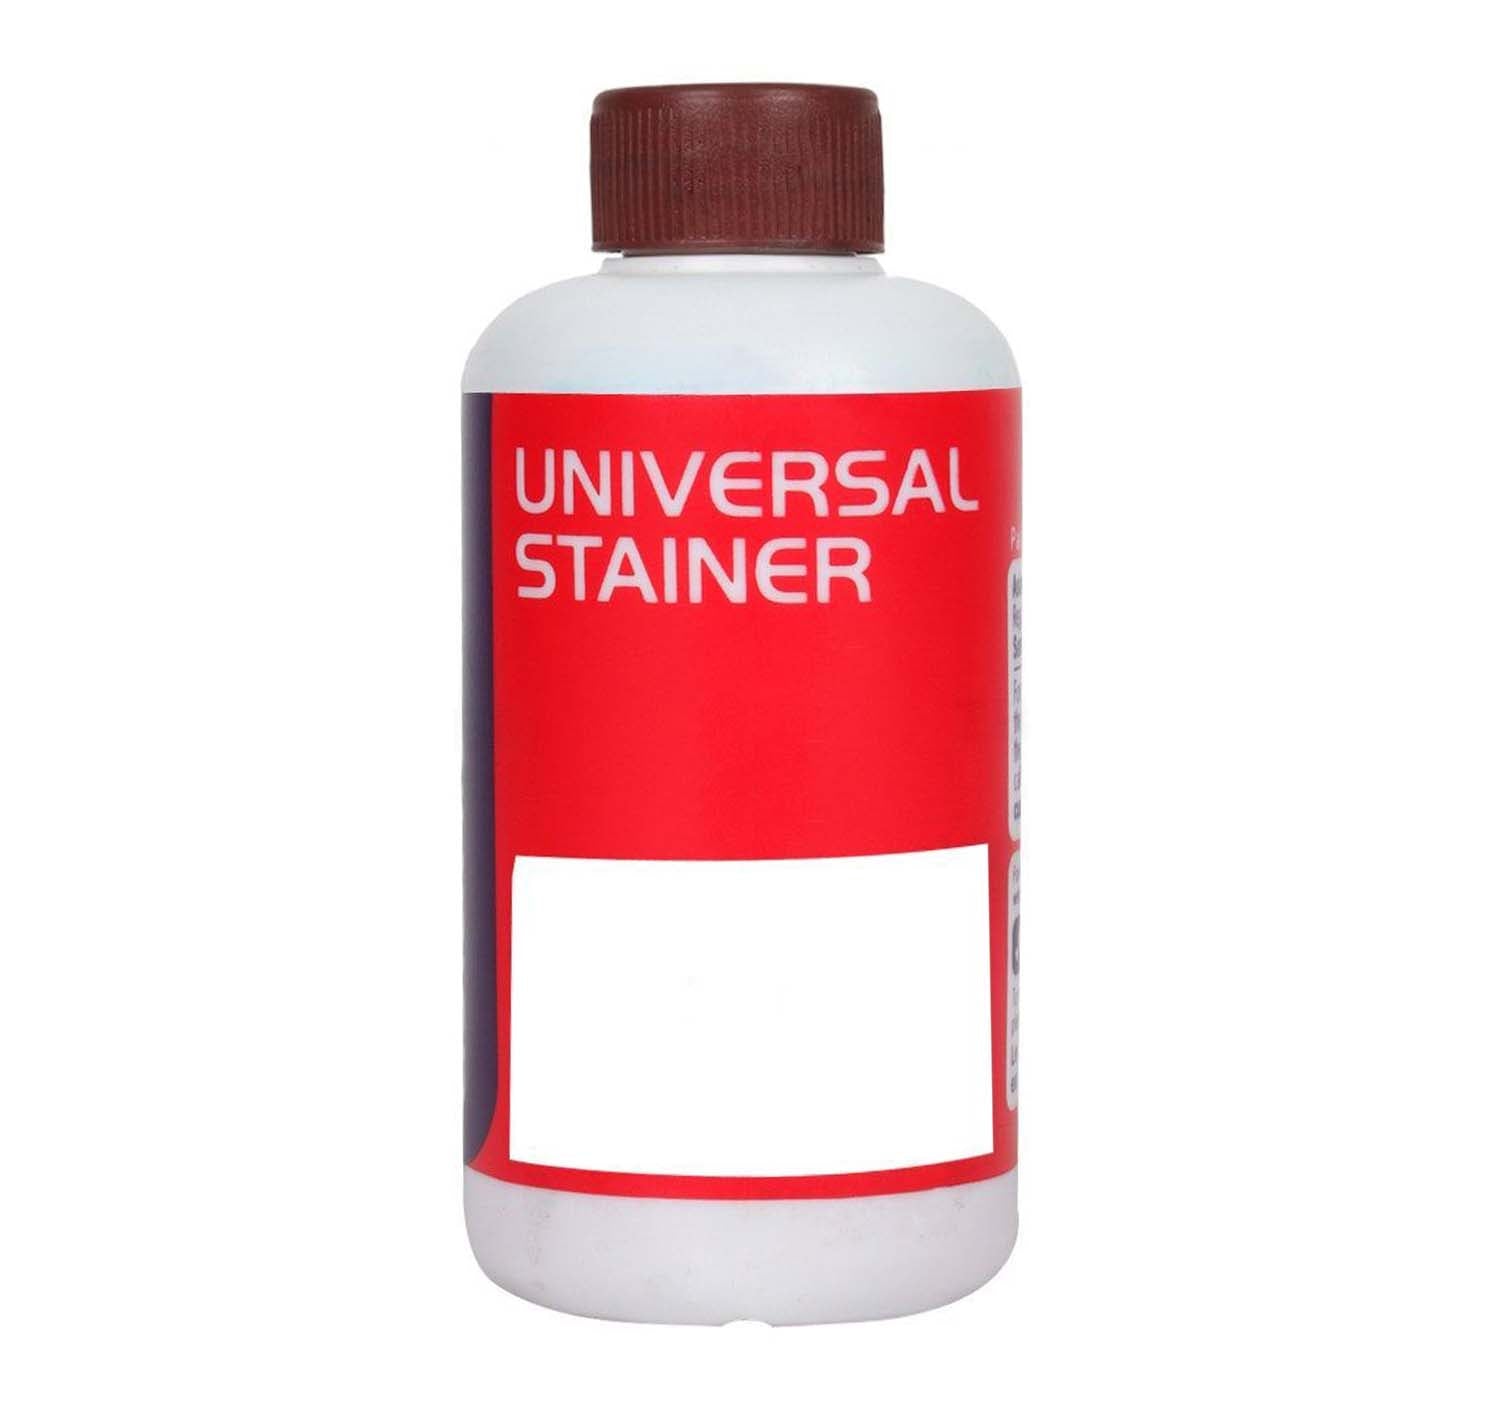 Asian Paints Universal Stainer for Emulsion And Enamel Paints Turkey Amber